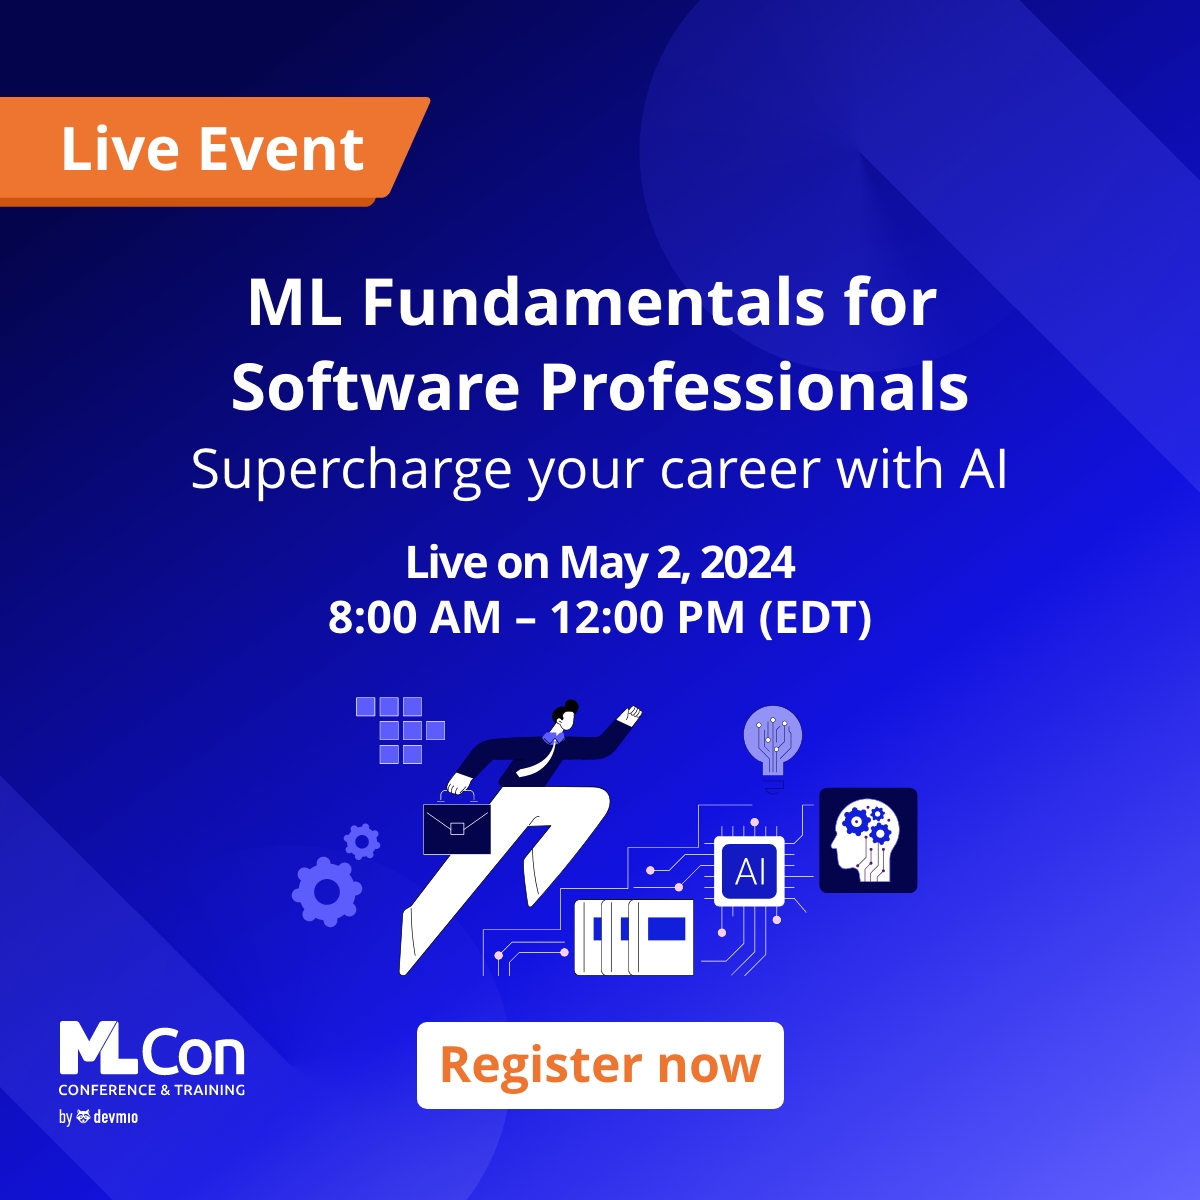 MLCon - The Event for Machine Learning Technologies & Innovations